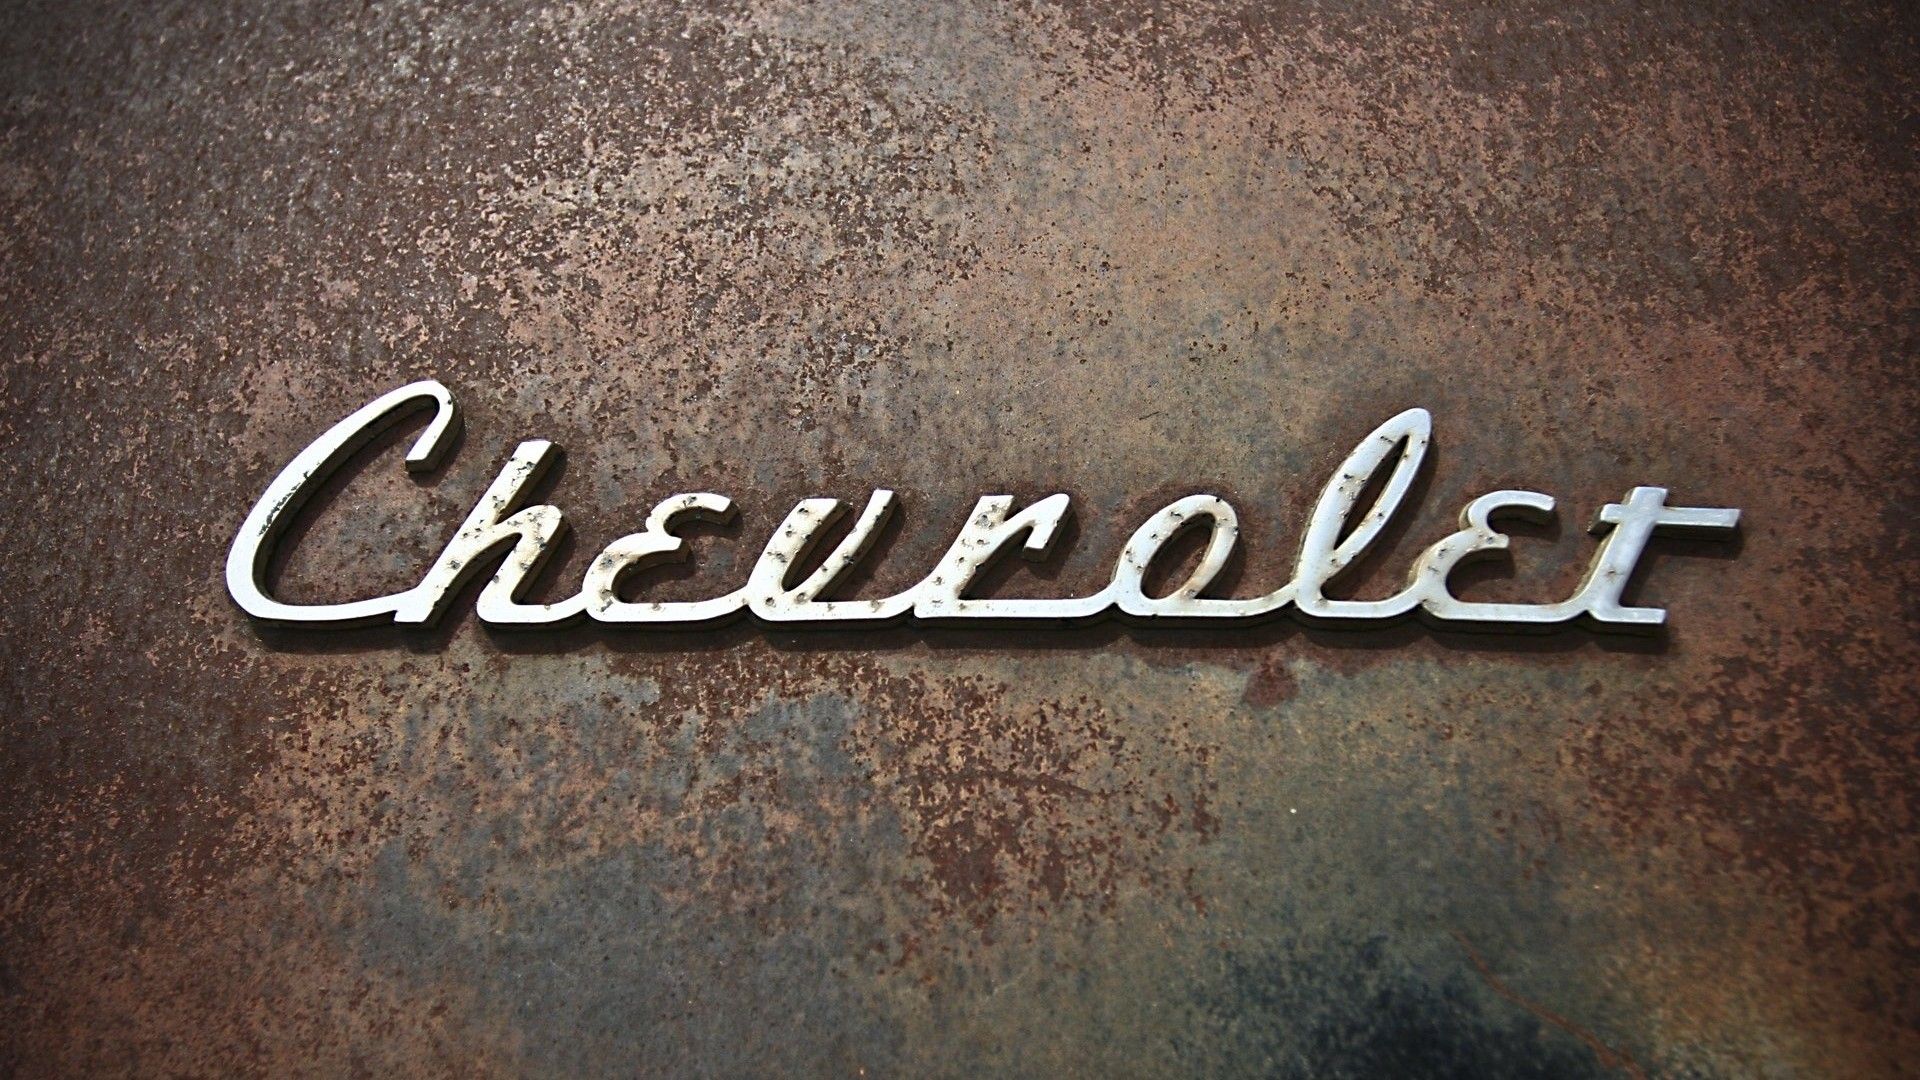 Chevy Logo Wallpaper background picture